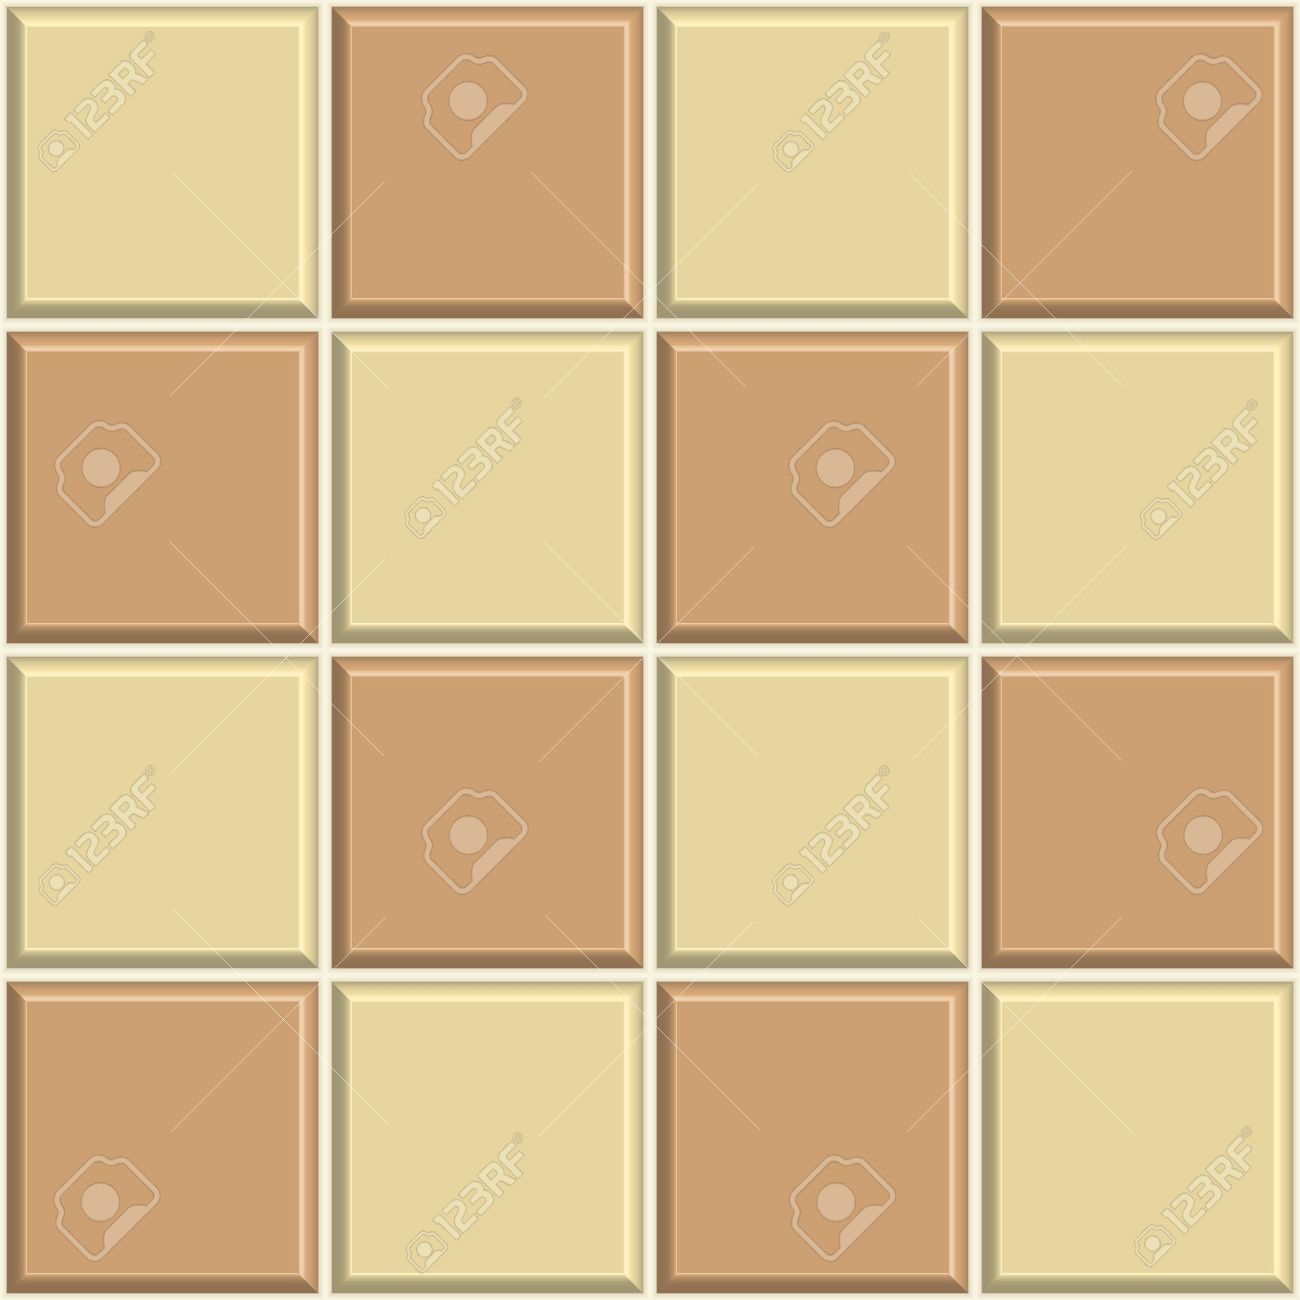 Tiles clipart #6, Download drawings